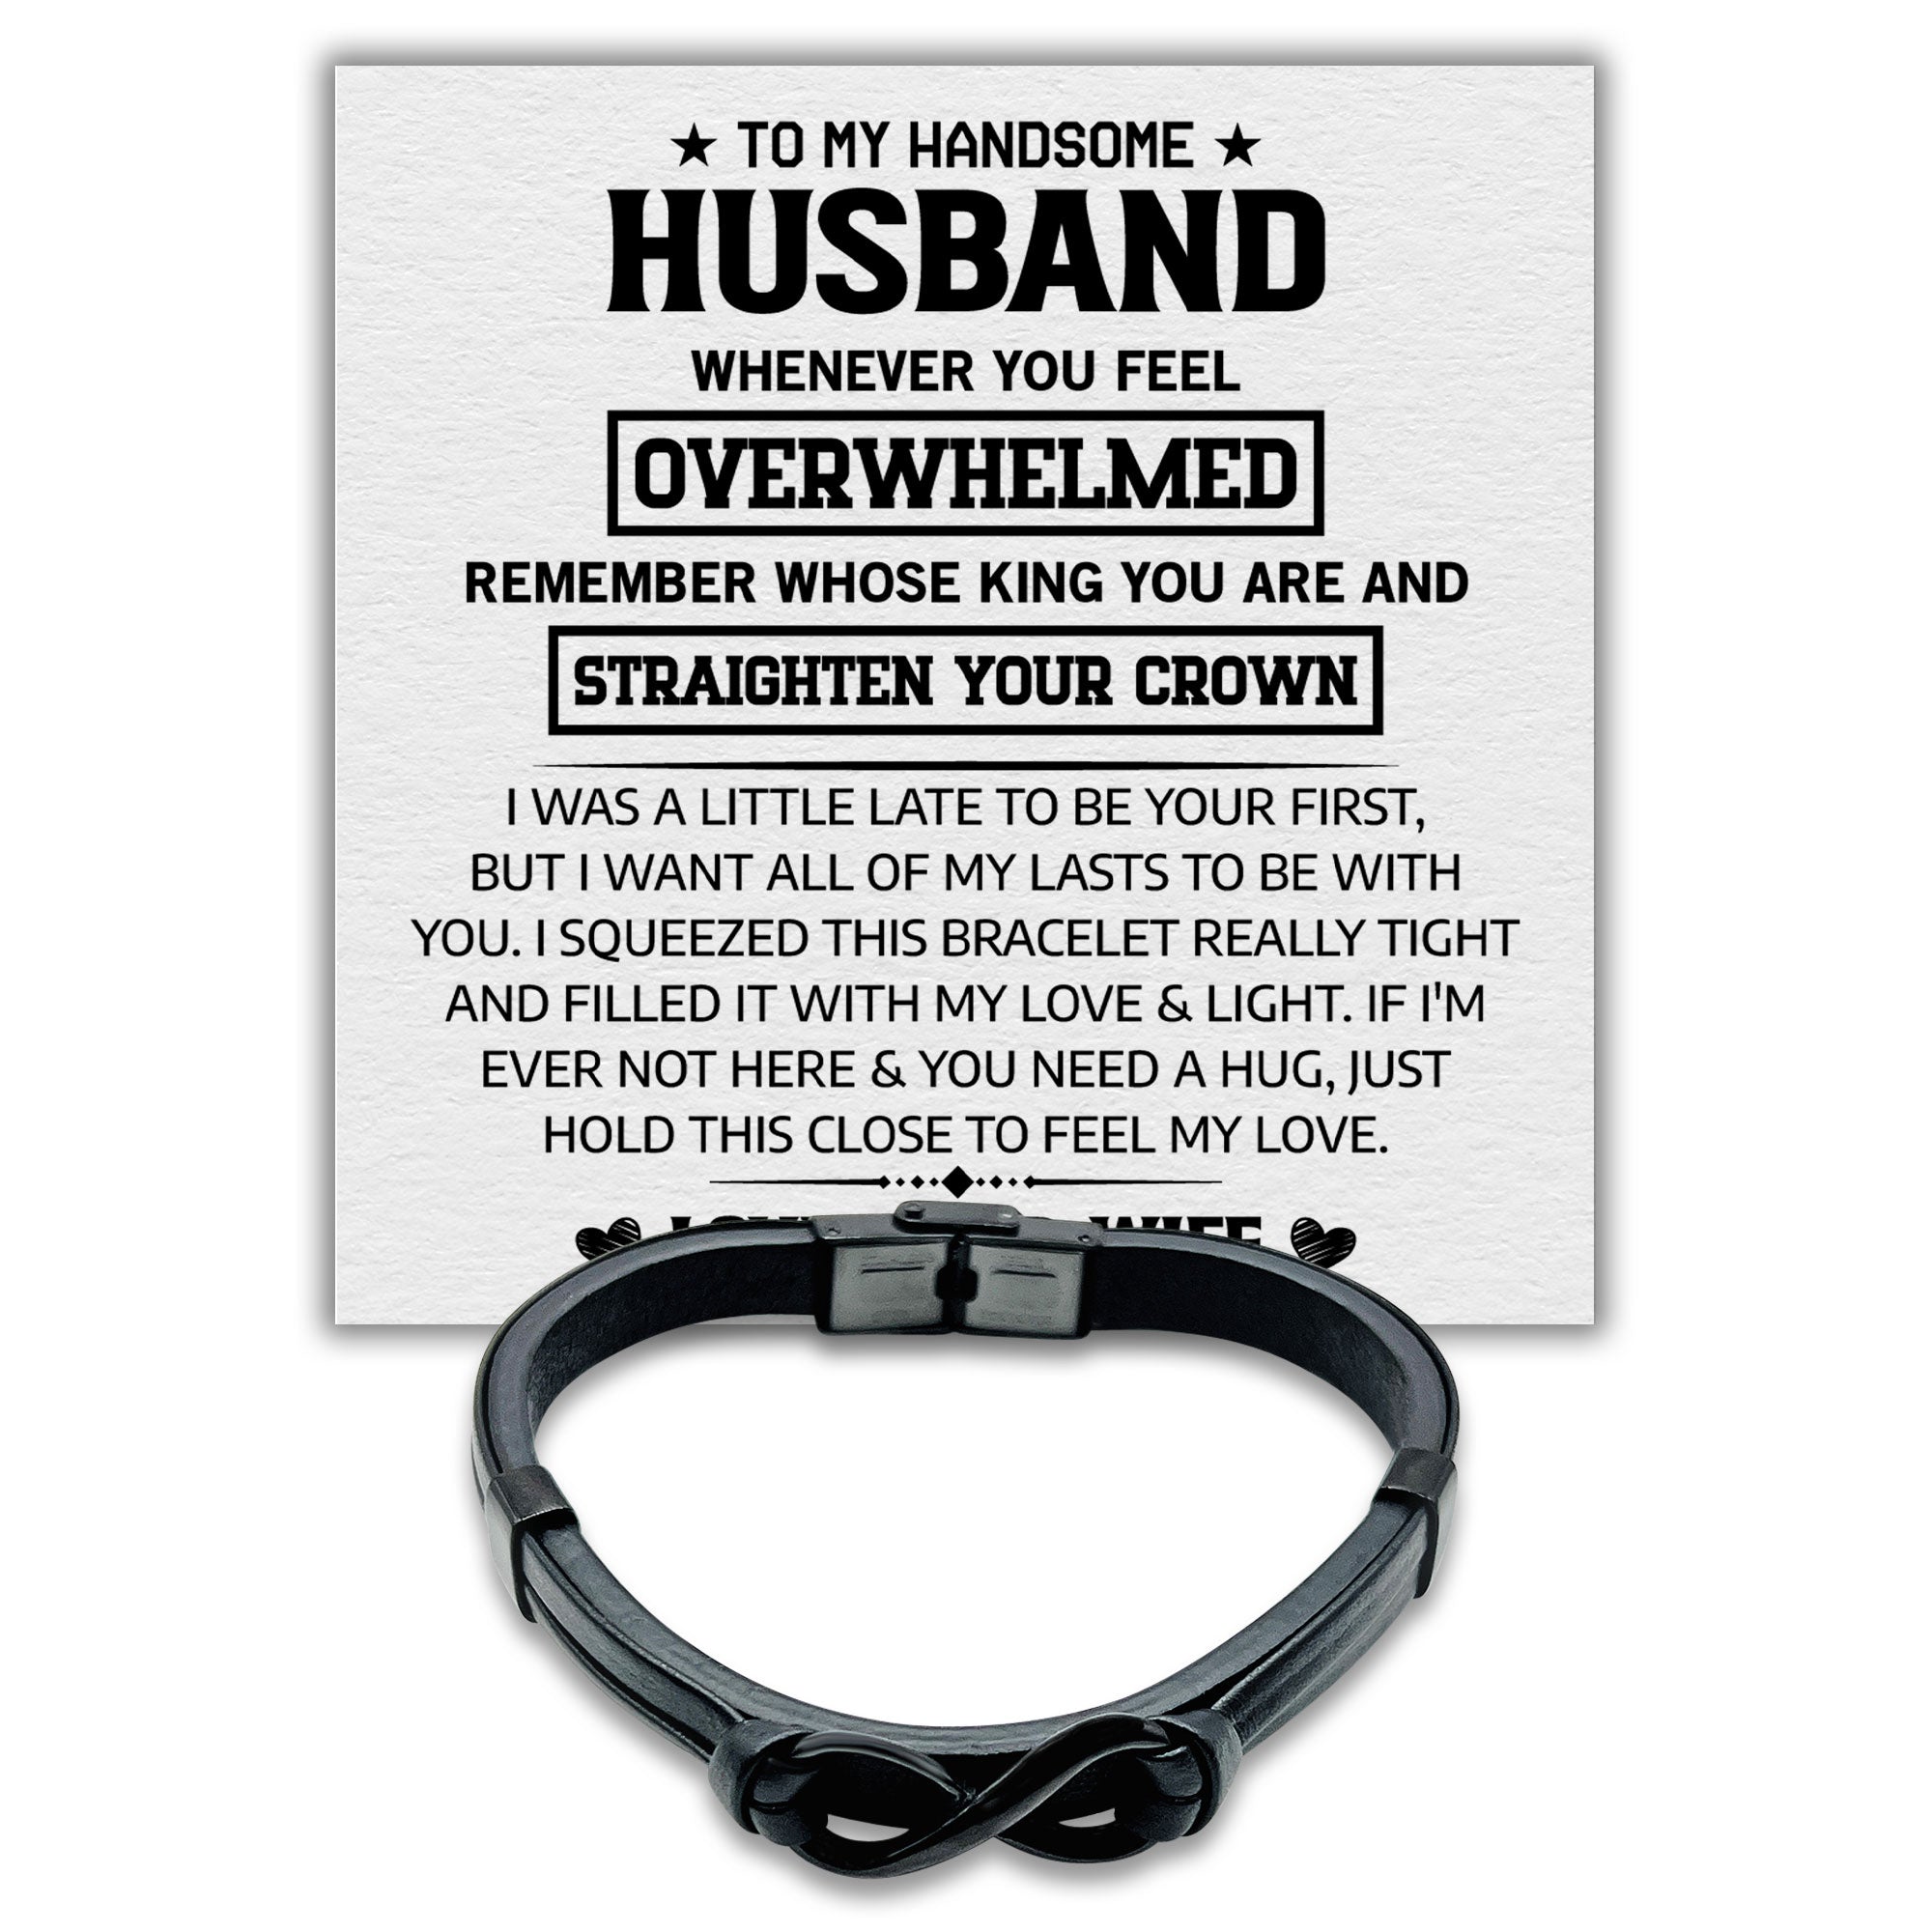 To my Husband I Love You With Every Bit of Energy and Soul - Premium Jet Black Italian Leather Stainless Steel Infinity Symbol Bracelet for Men